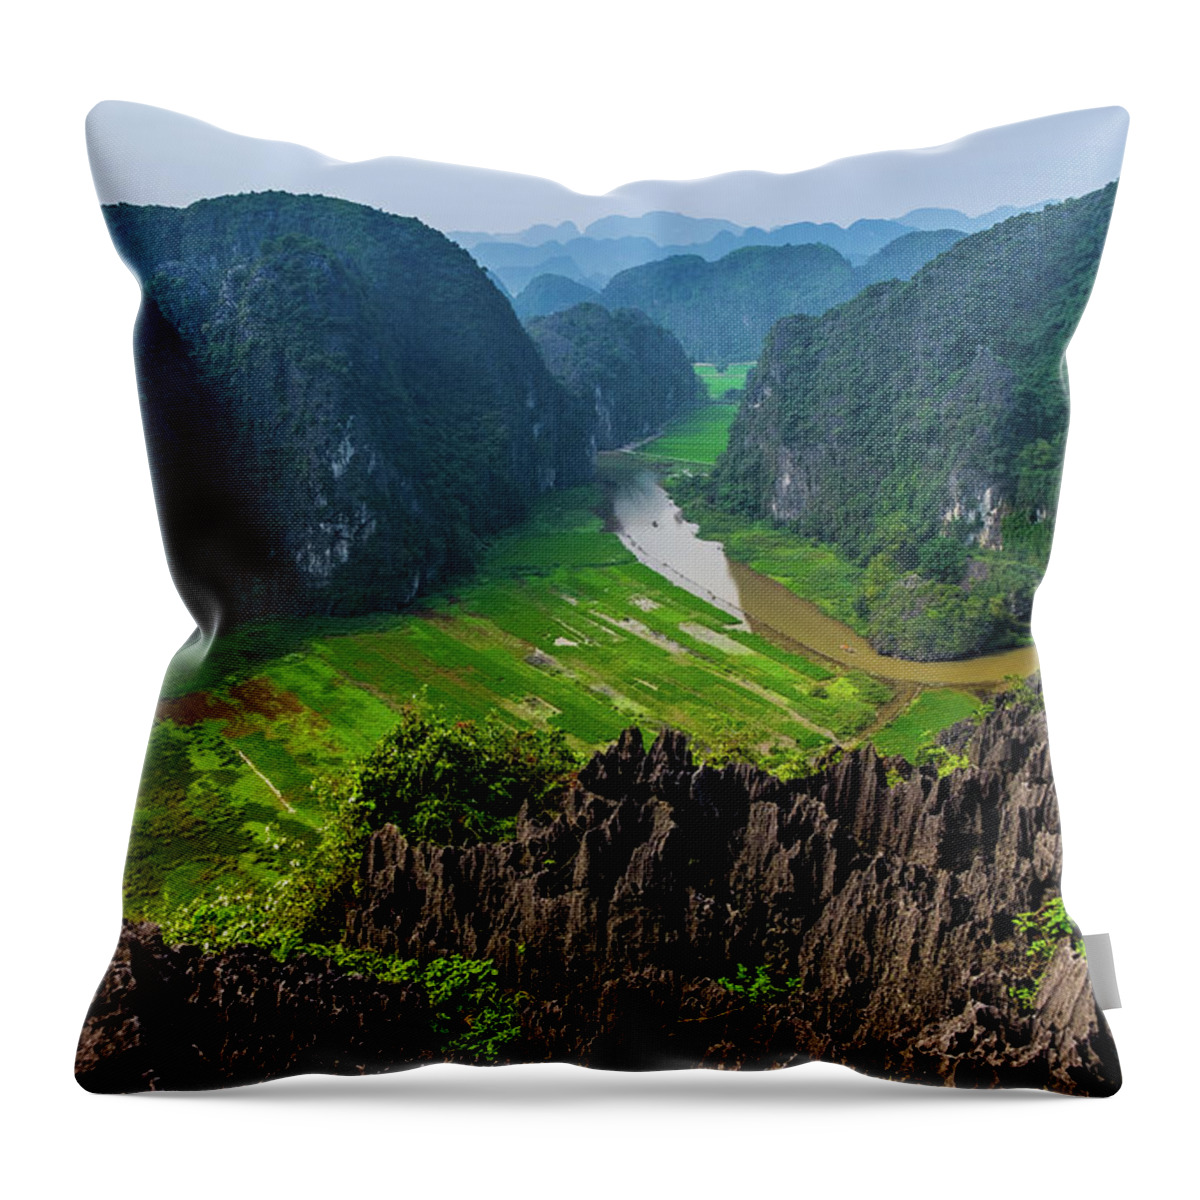 Ba Giot Throw Pillow featuring the photograph View from Hang Mua Peak by Arj Munoz